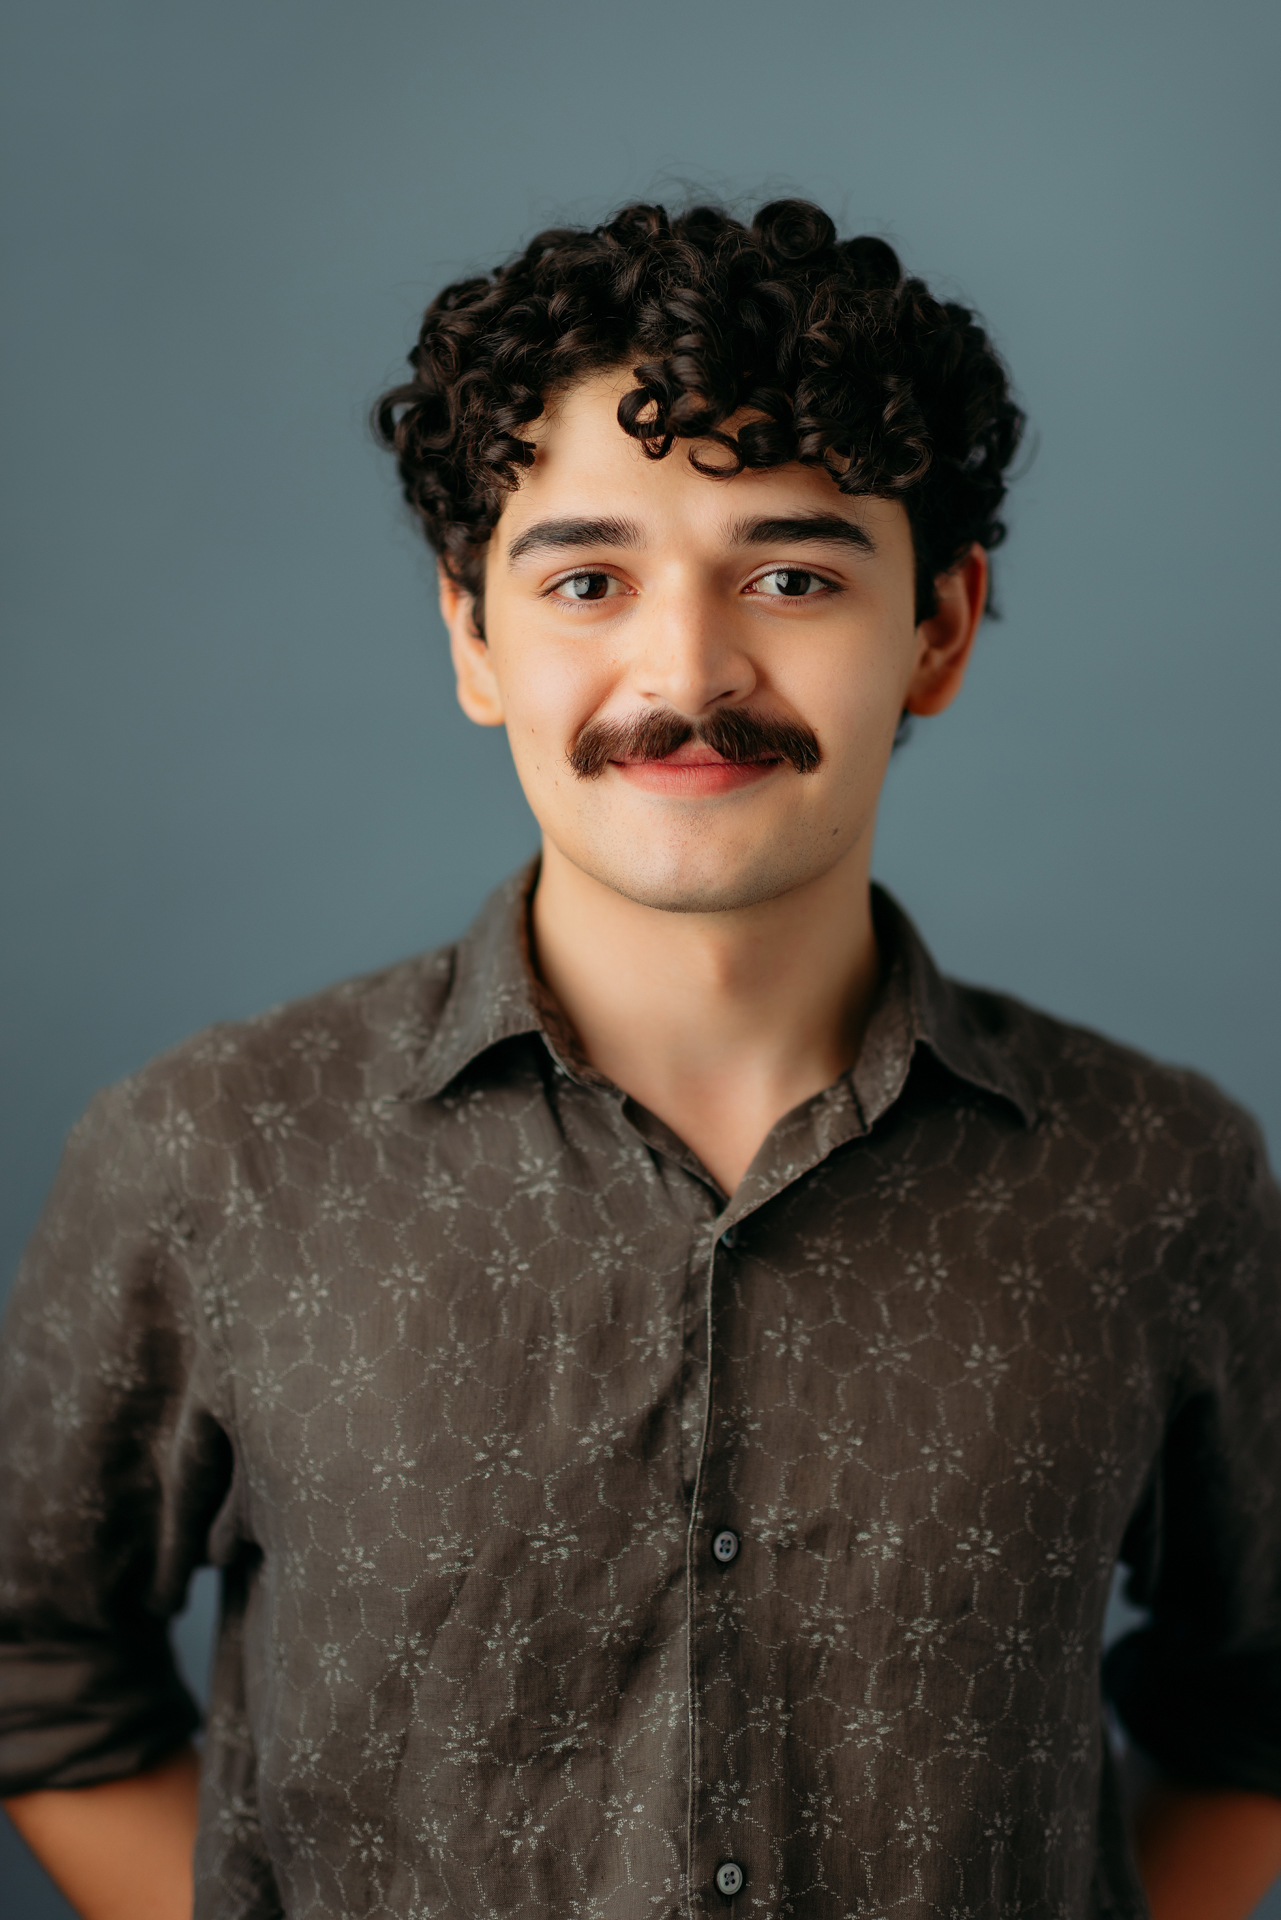 Professional actor headshot of young man with curly hair wearing gray shirt on light blue gray backdrop